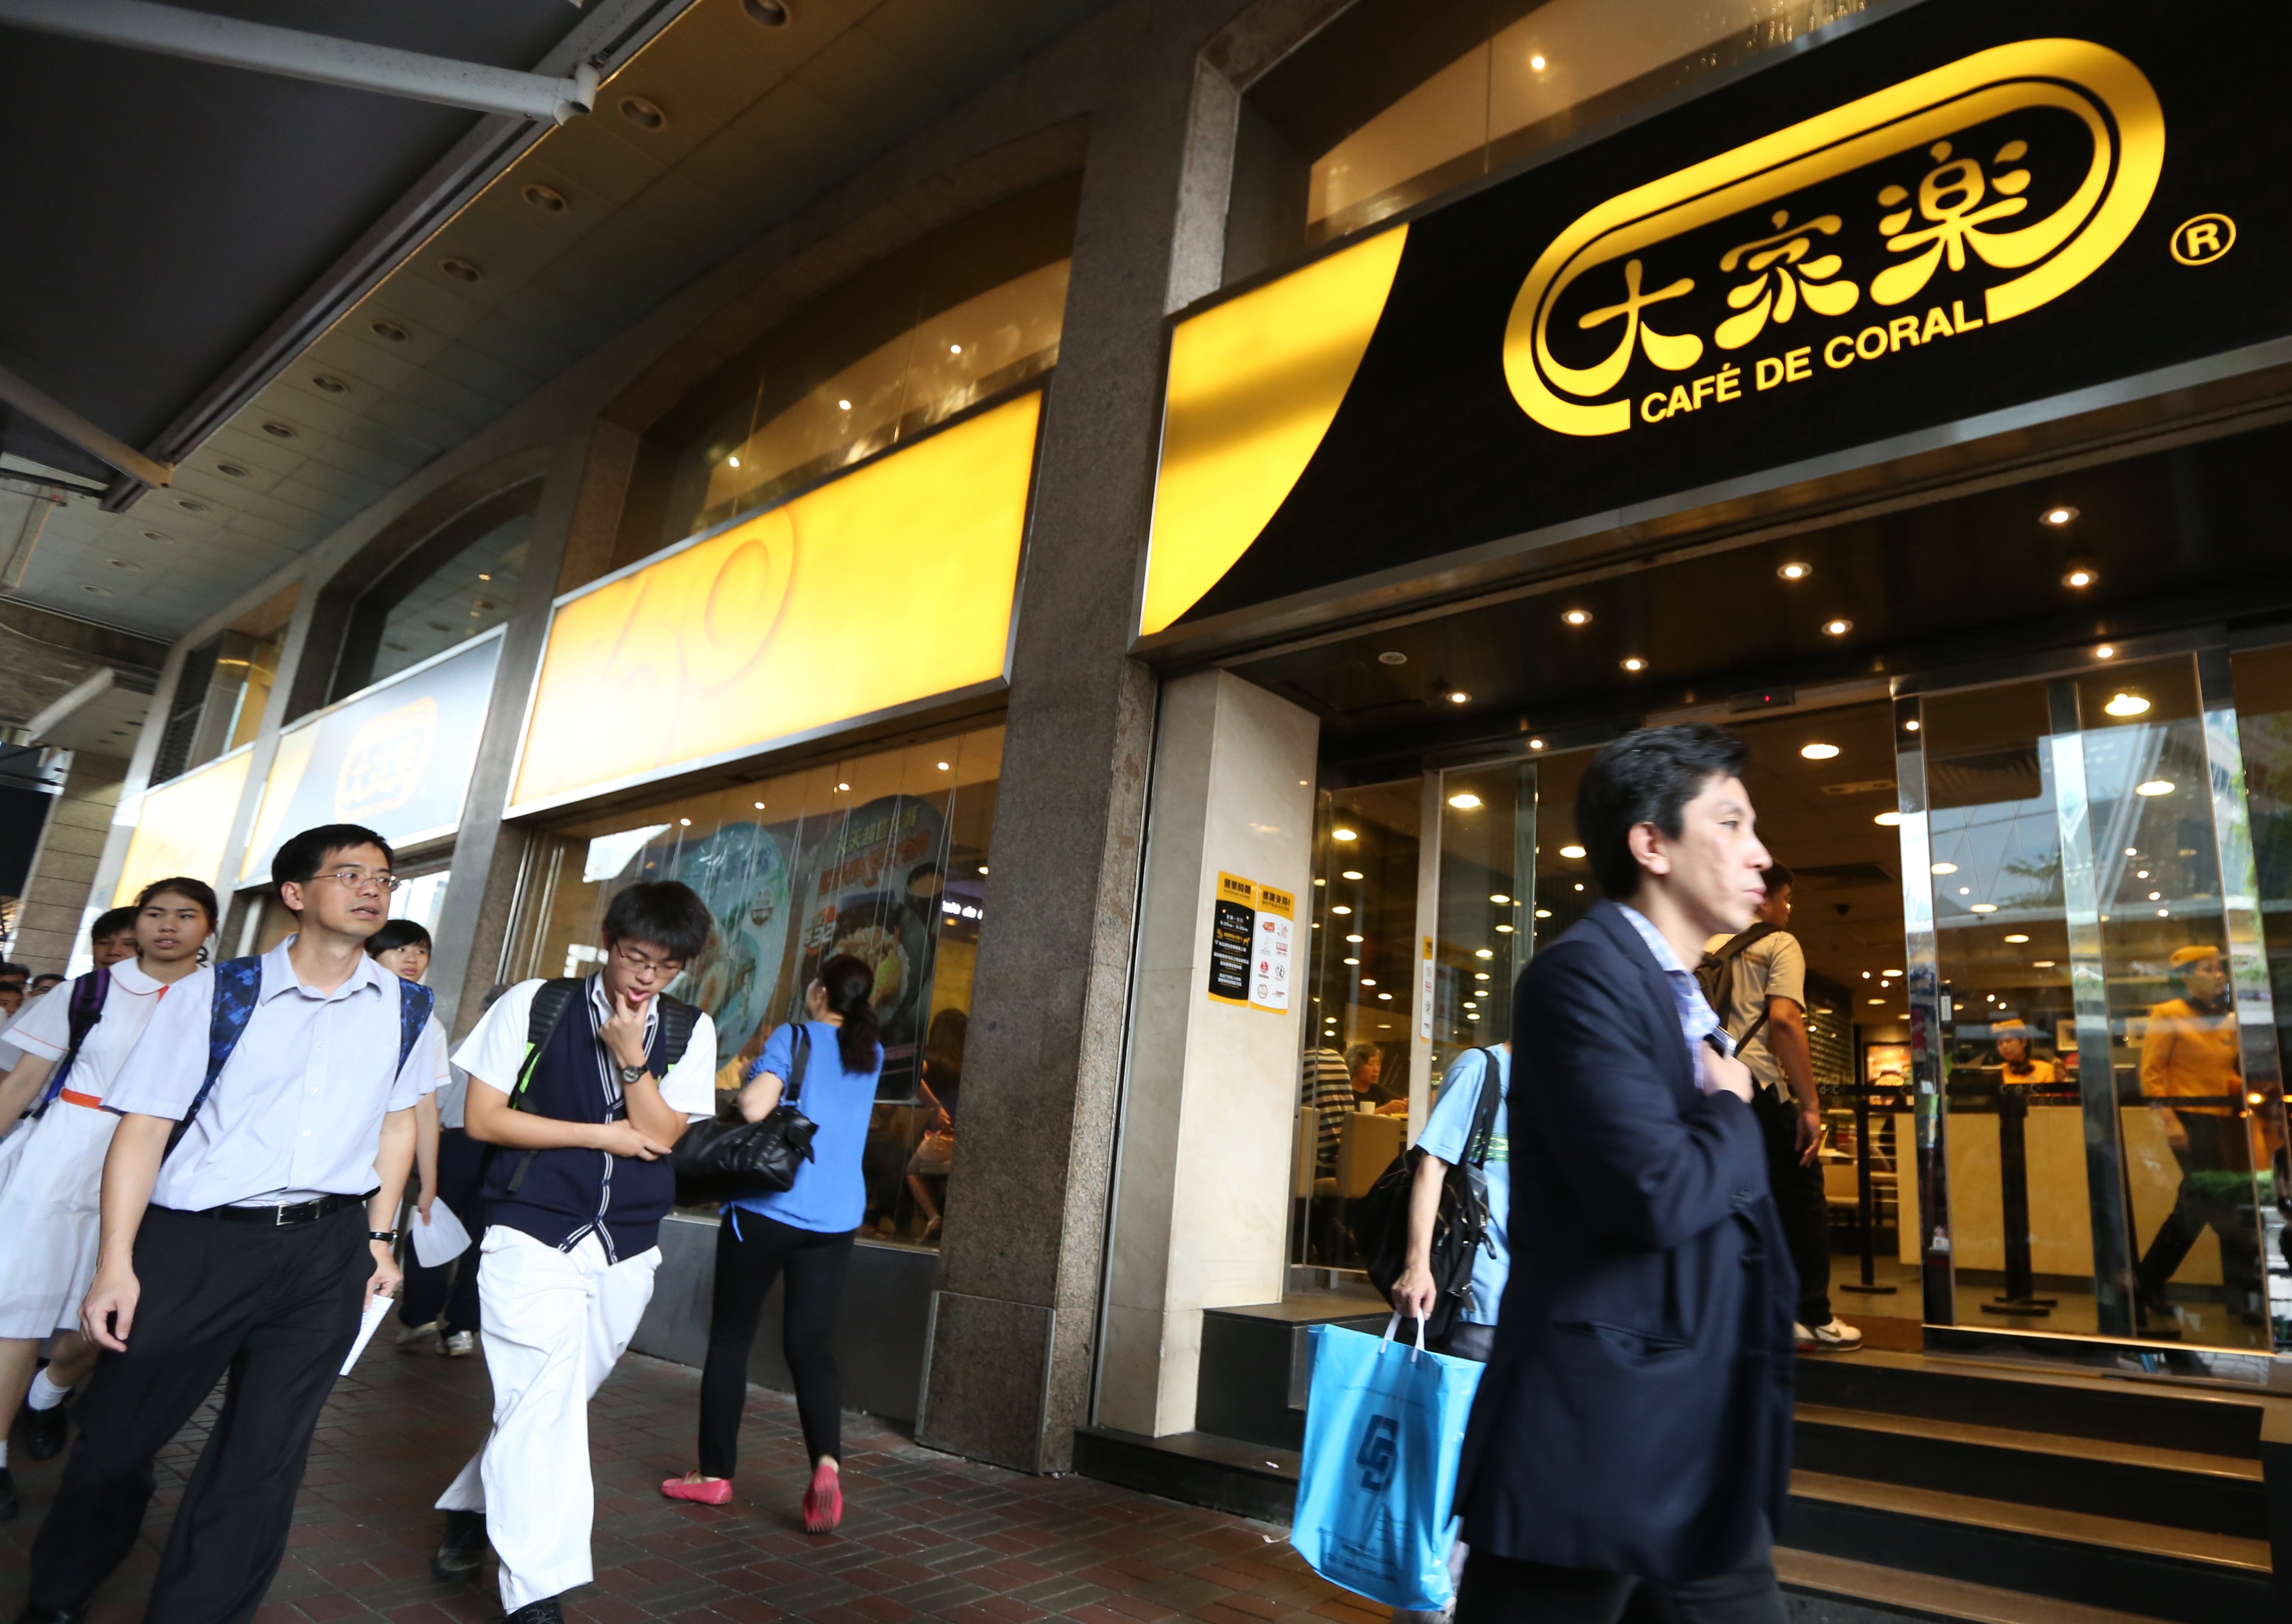 Cafe de Coral is Hong Kong’s largest fast food chain with 463 outlets. Photo: Nora Tam